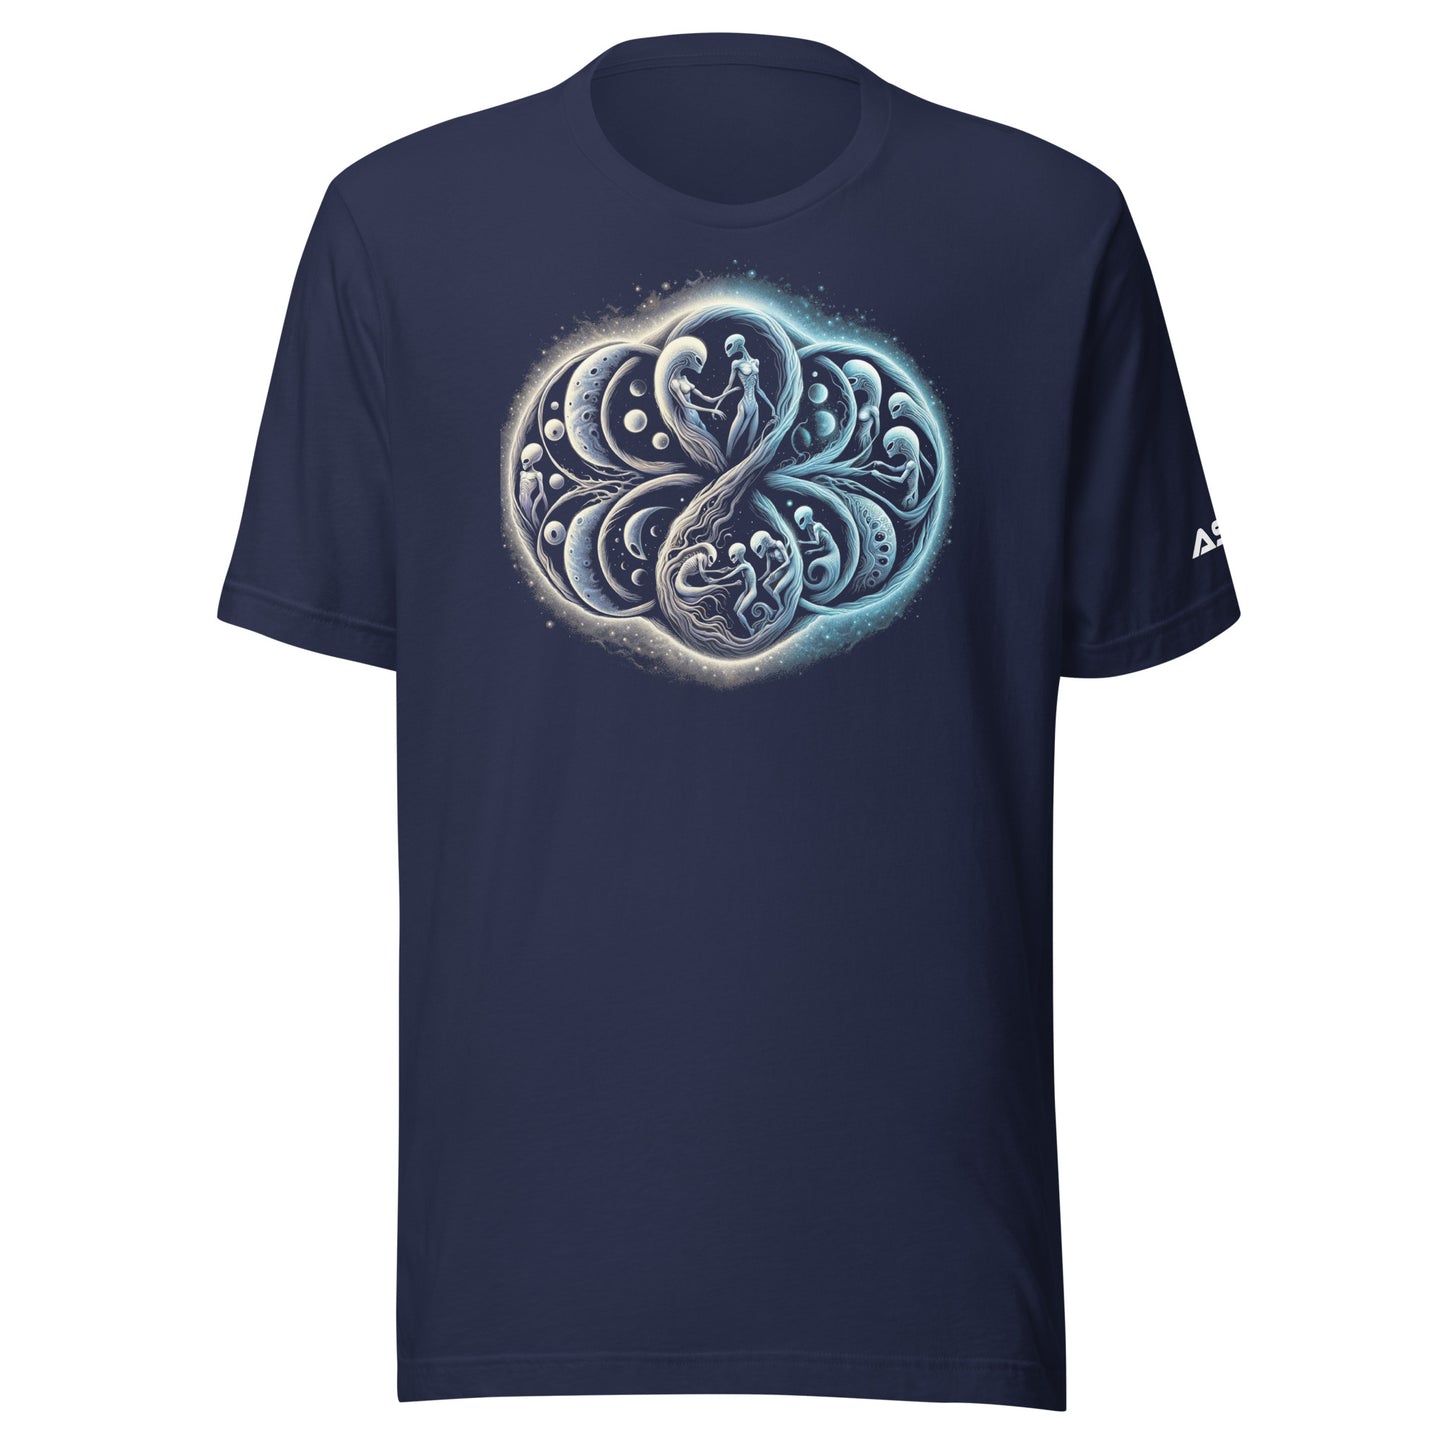 Embryonic Cycles T-shirt